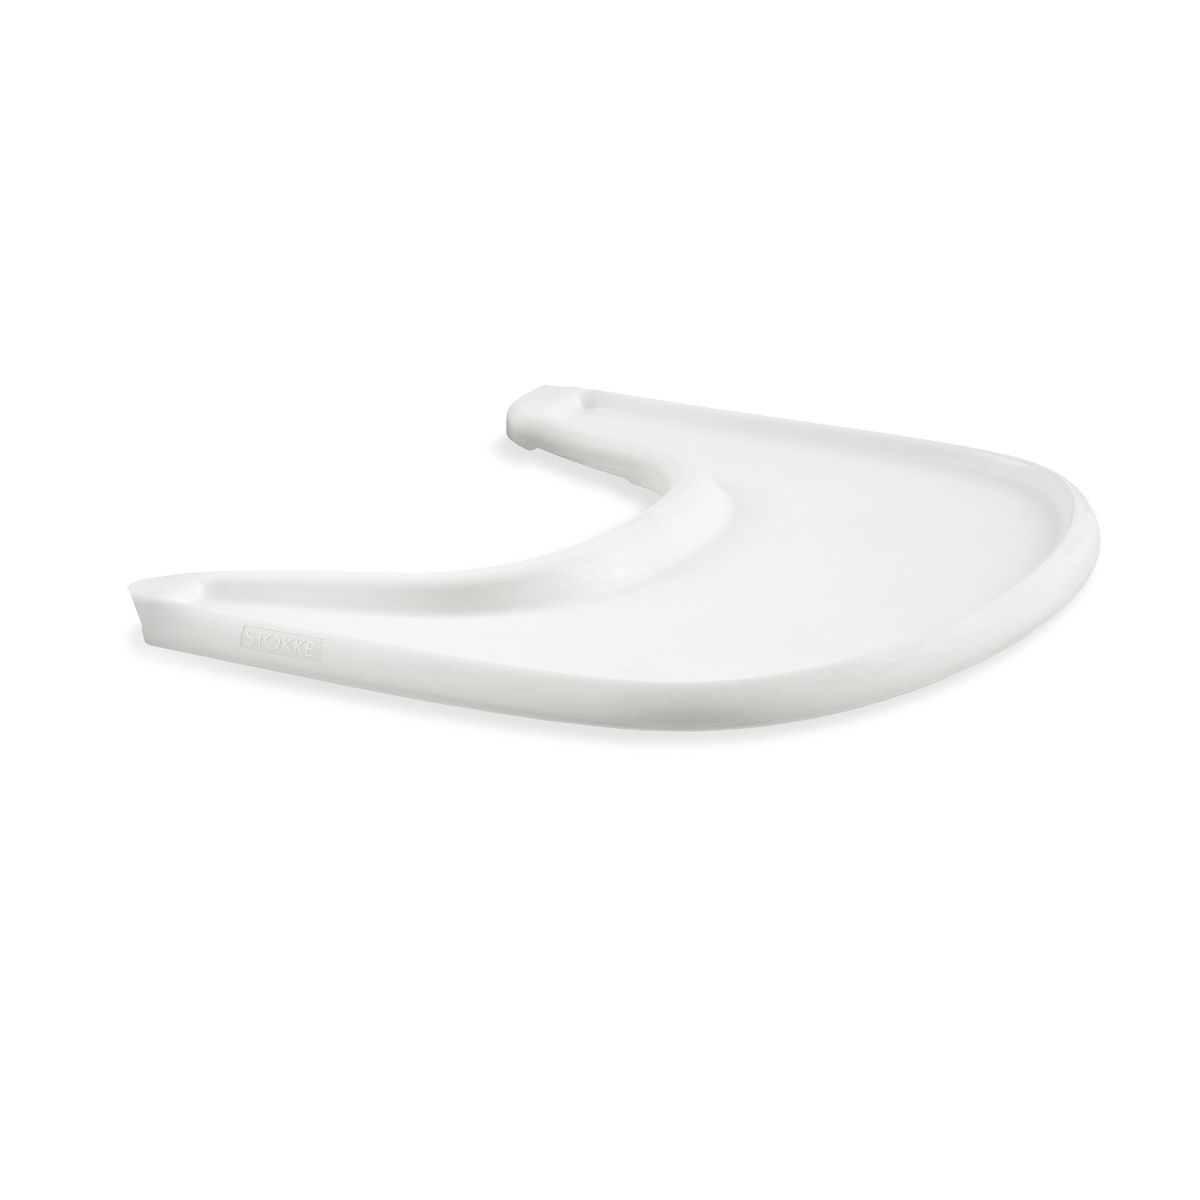 Stokke Tripp Trapp High Chair Tray - White | Target